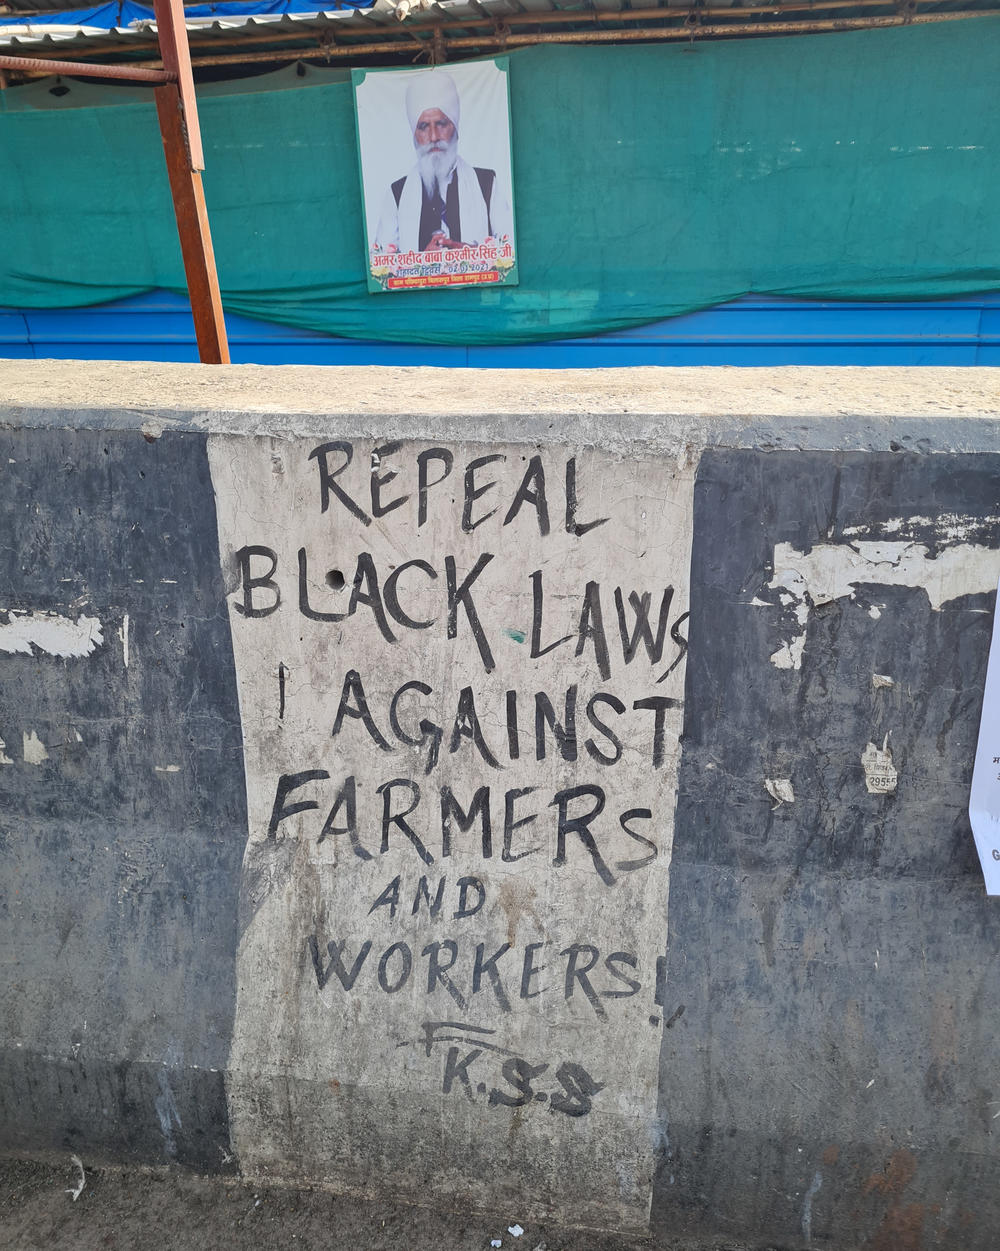 Pro-farmer graffiti on a highway barricade near Ghazipur, where Indian farmers have been camping out for a year, protesting against Prime Minister Narendra Modi's farm laws.